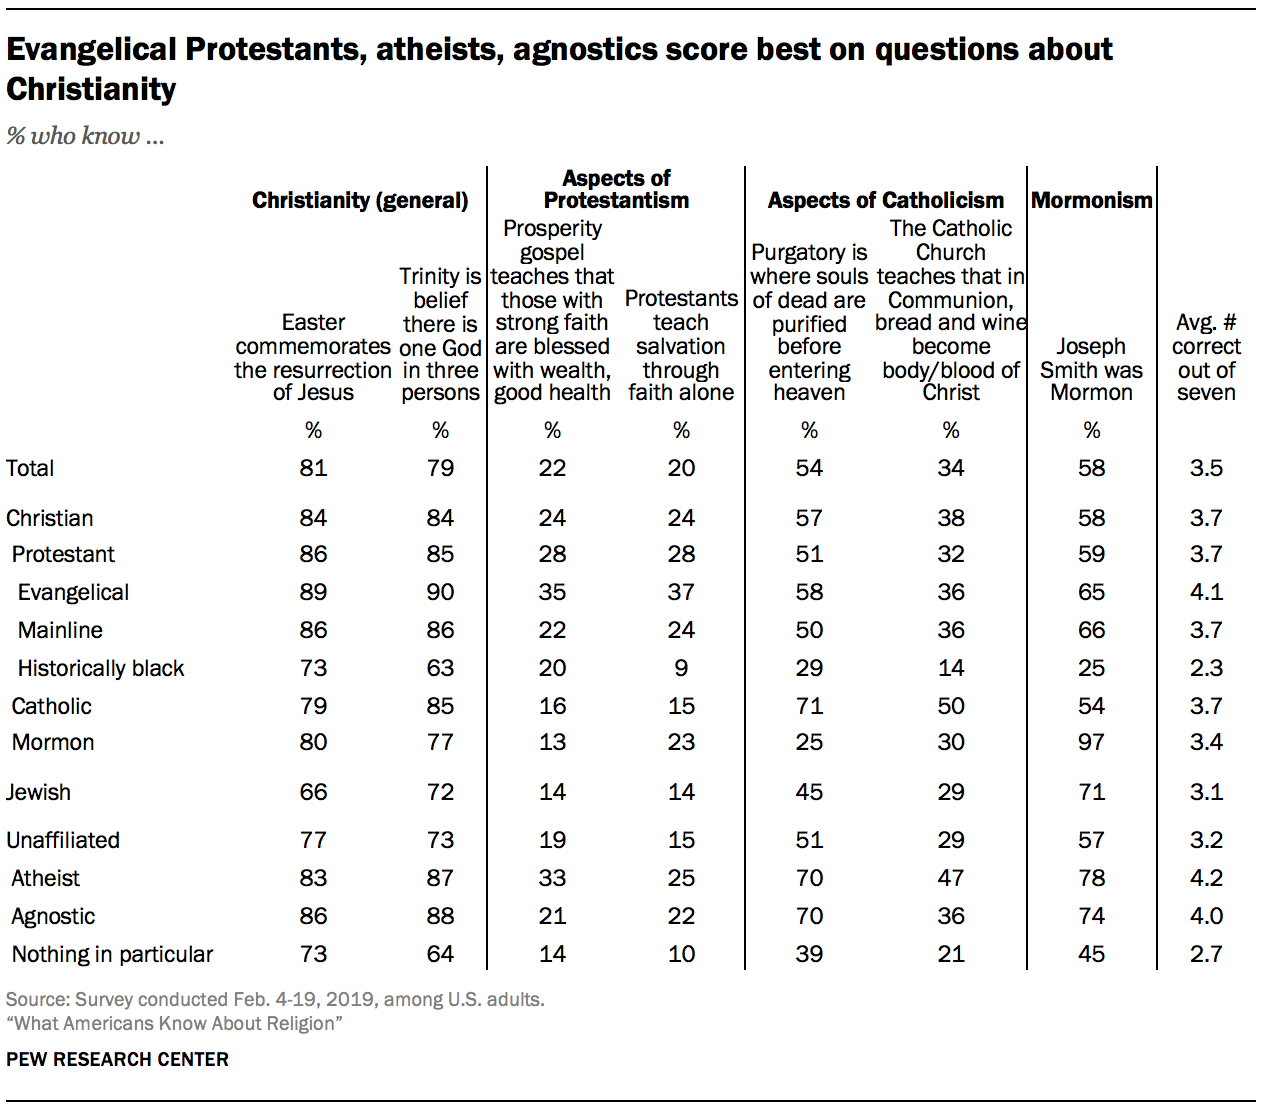 Evangelical Protestants, atheists, agnostics score best on questions about Christianity